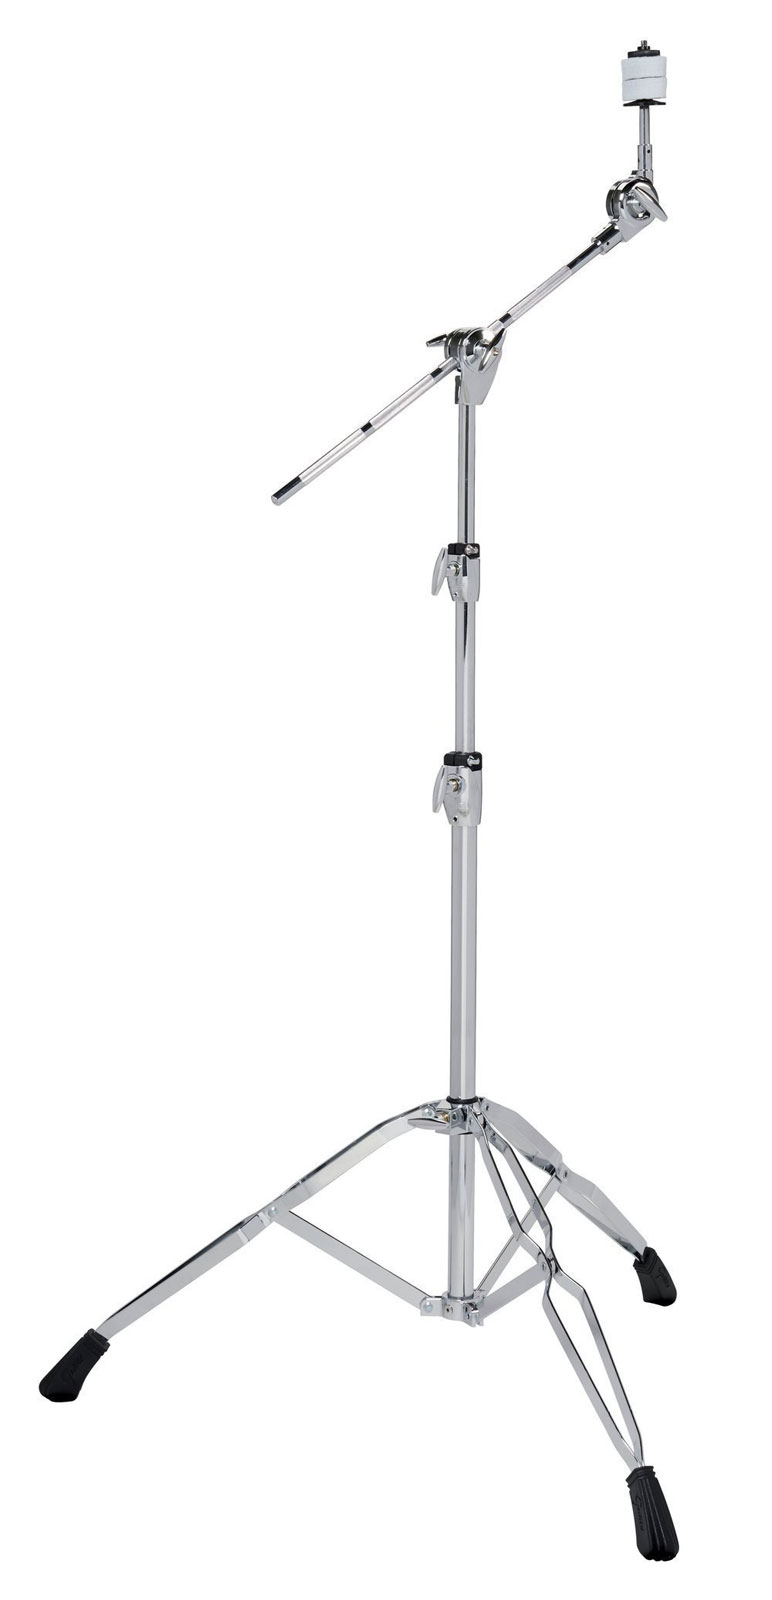 GRETSCH DRUMS BOOM CYMBAL STAND GR-G5CB 